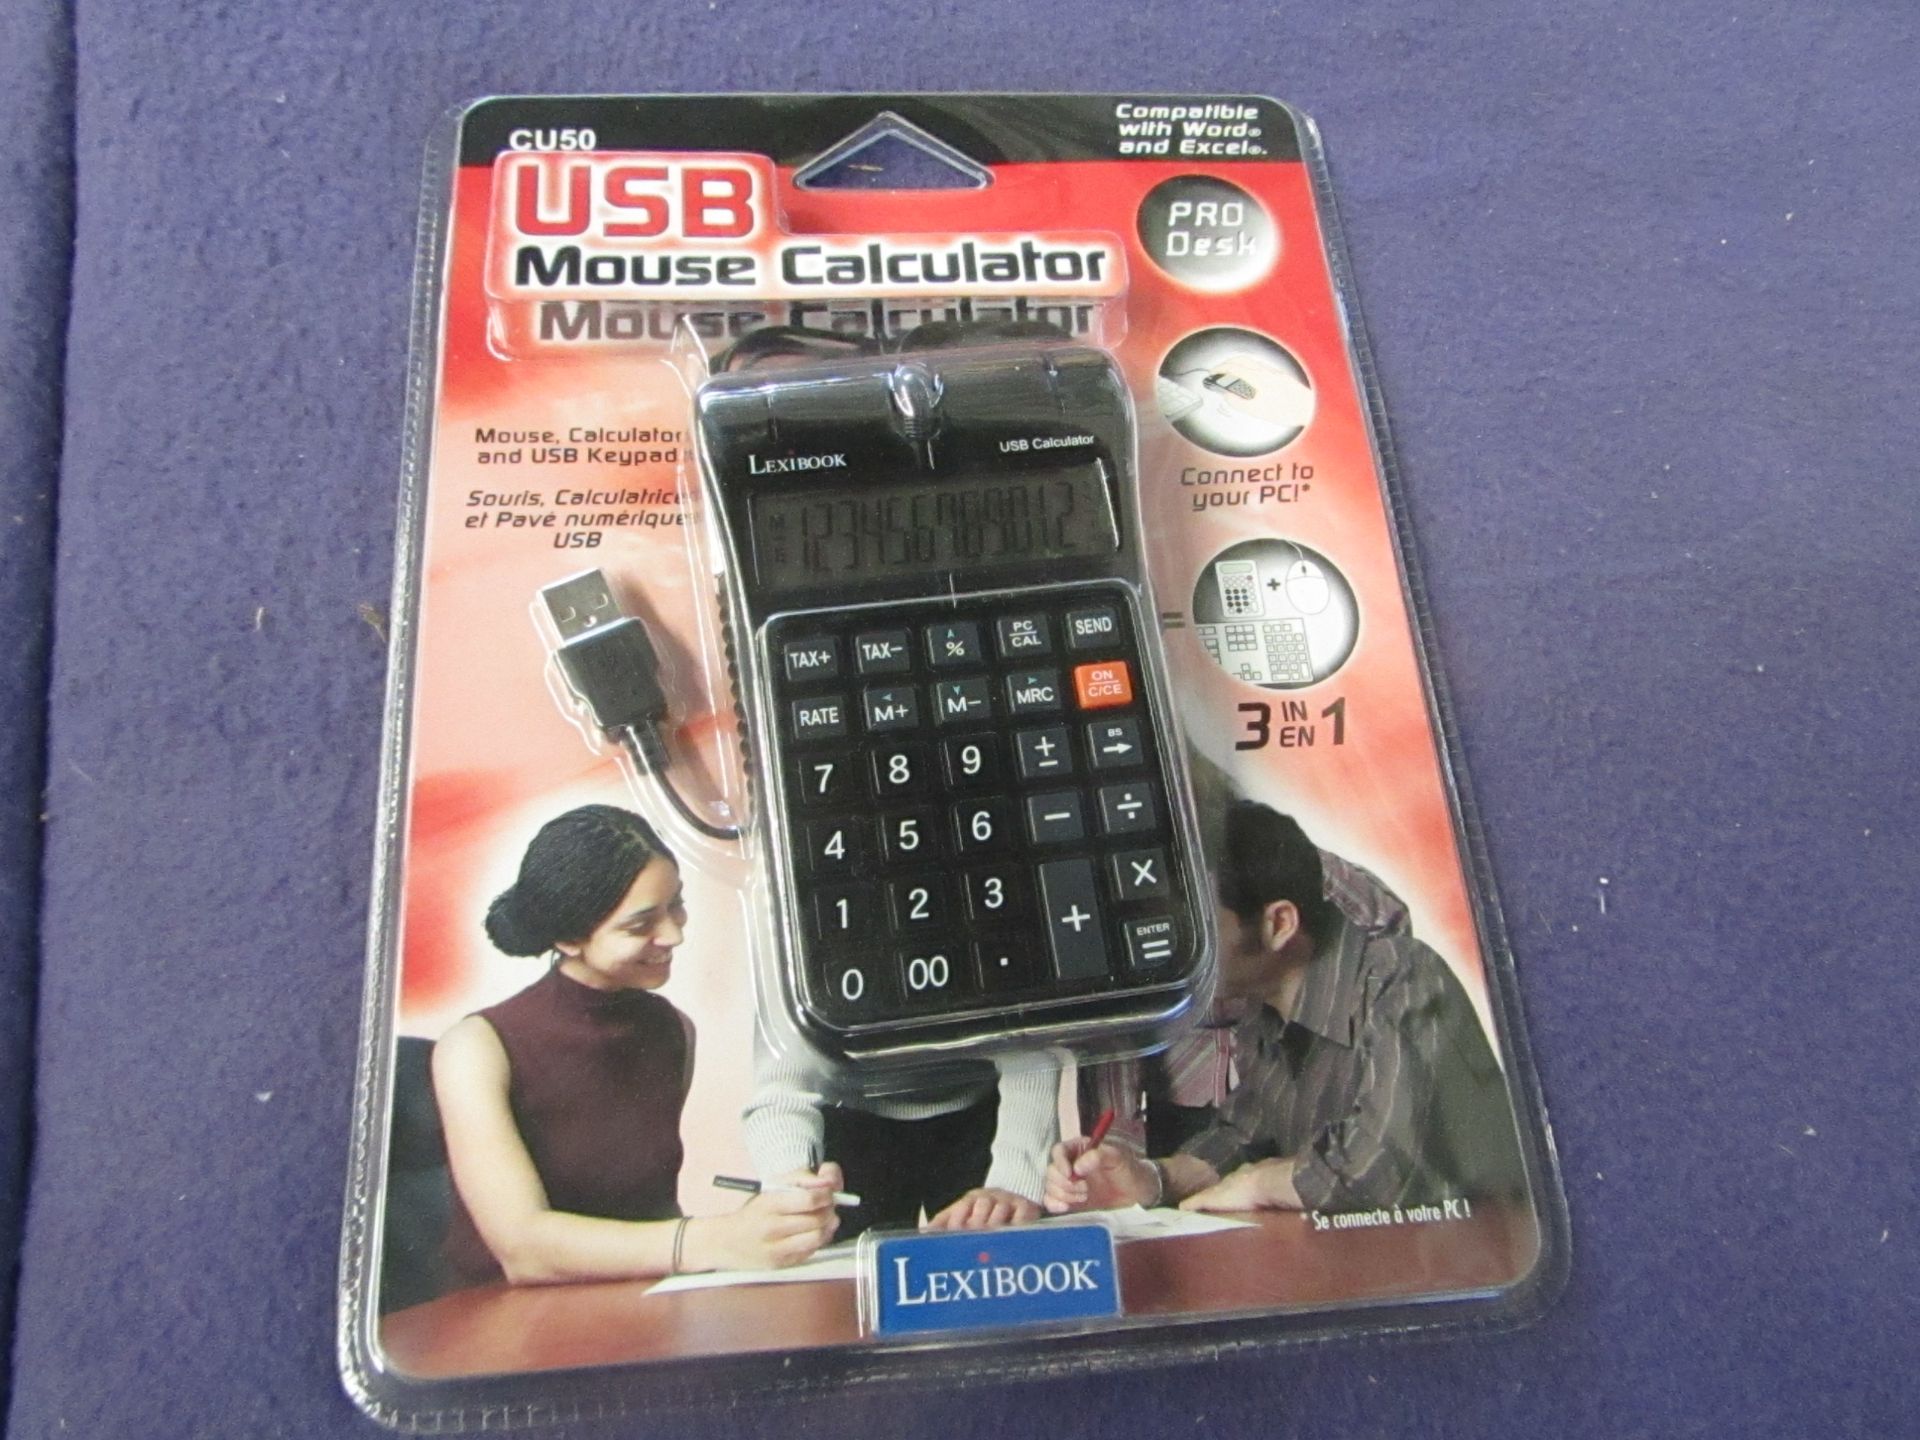 24x Lexibook - USB Mouse Calculator ( Conpatible With Work & Excel ) - New & Packaged.